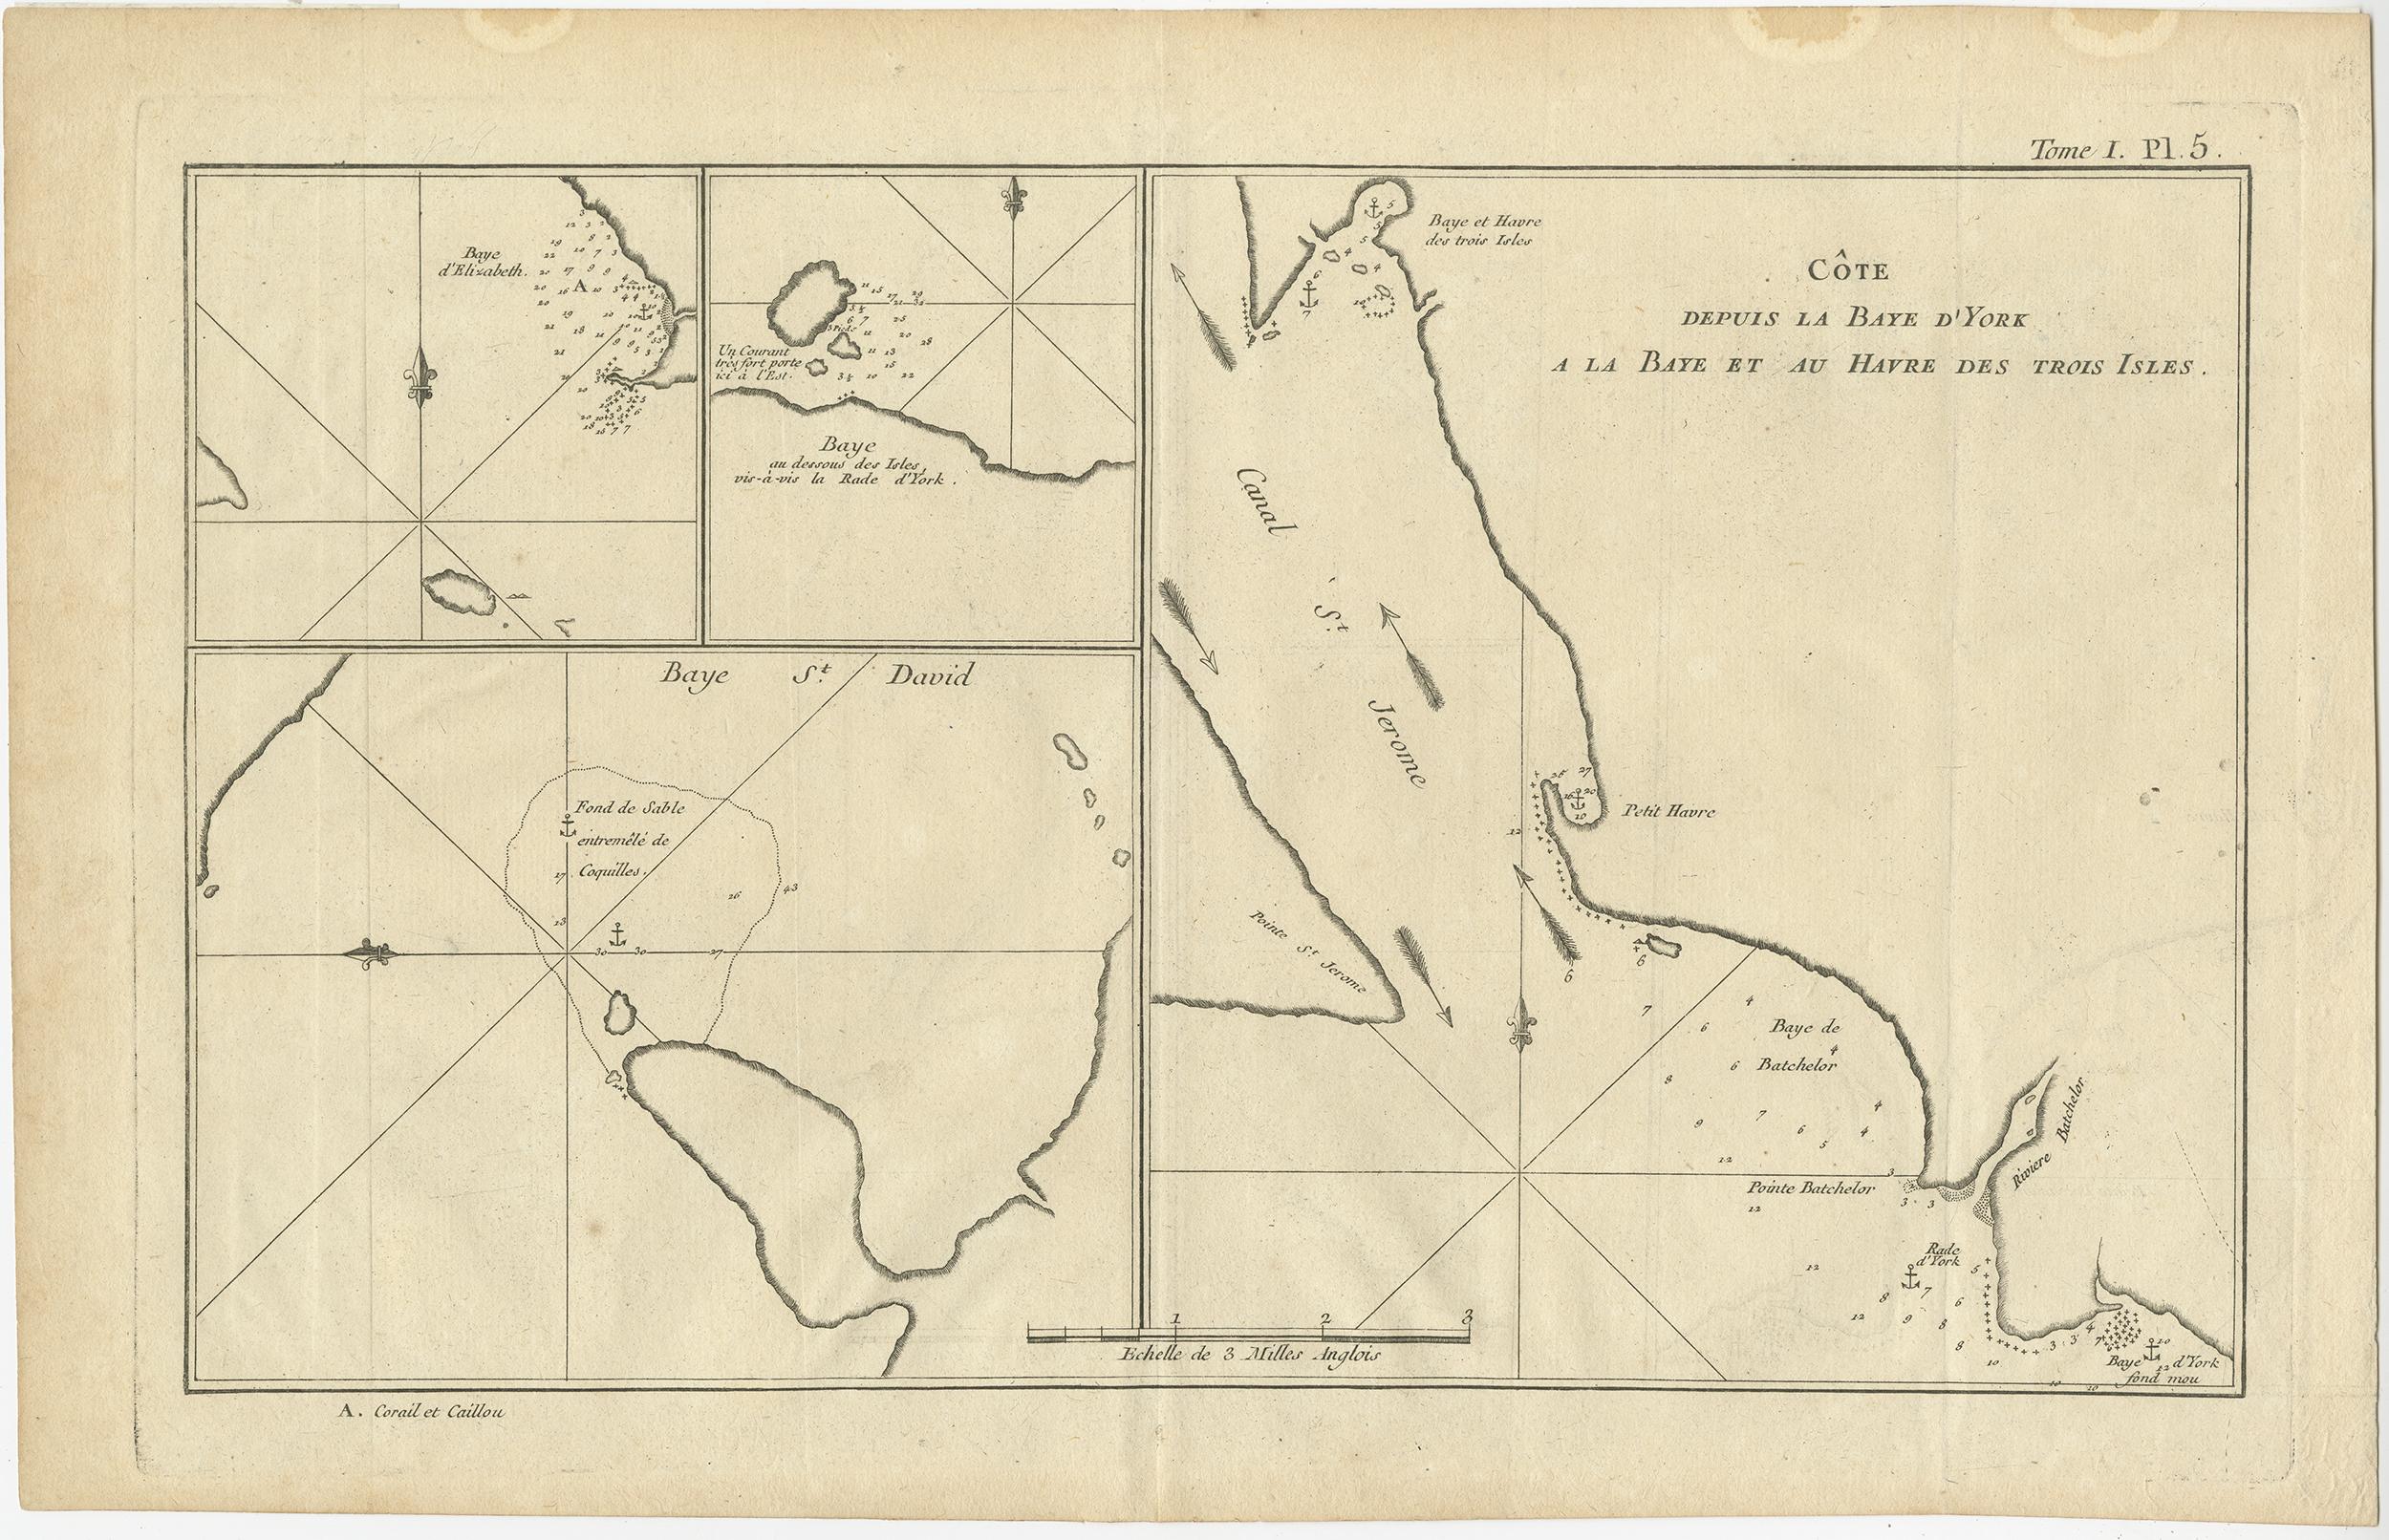 Antique map titled 'Baye St. David (..)'. Charts of York's Bay, Haven of the Three Islands, St. David's Bay, and Elizabeth's Bay. This map originates from the French edition of 'An Account of the Voyages Undertaken by the Order of His Present